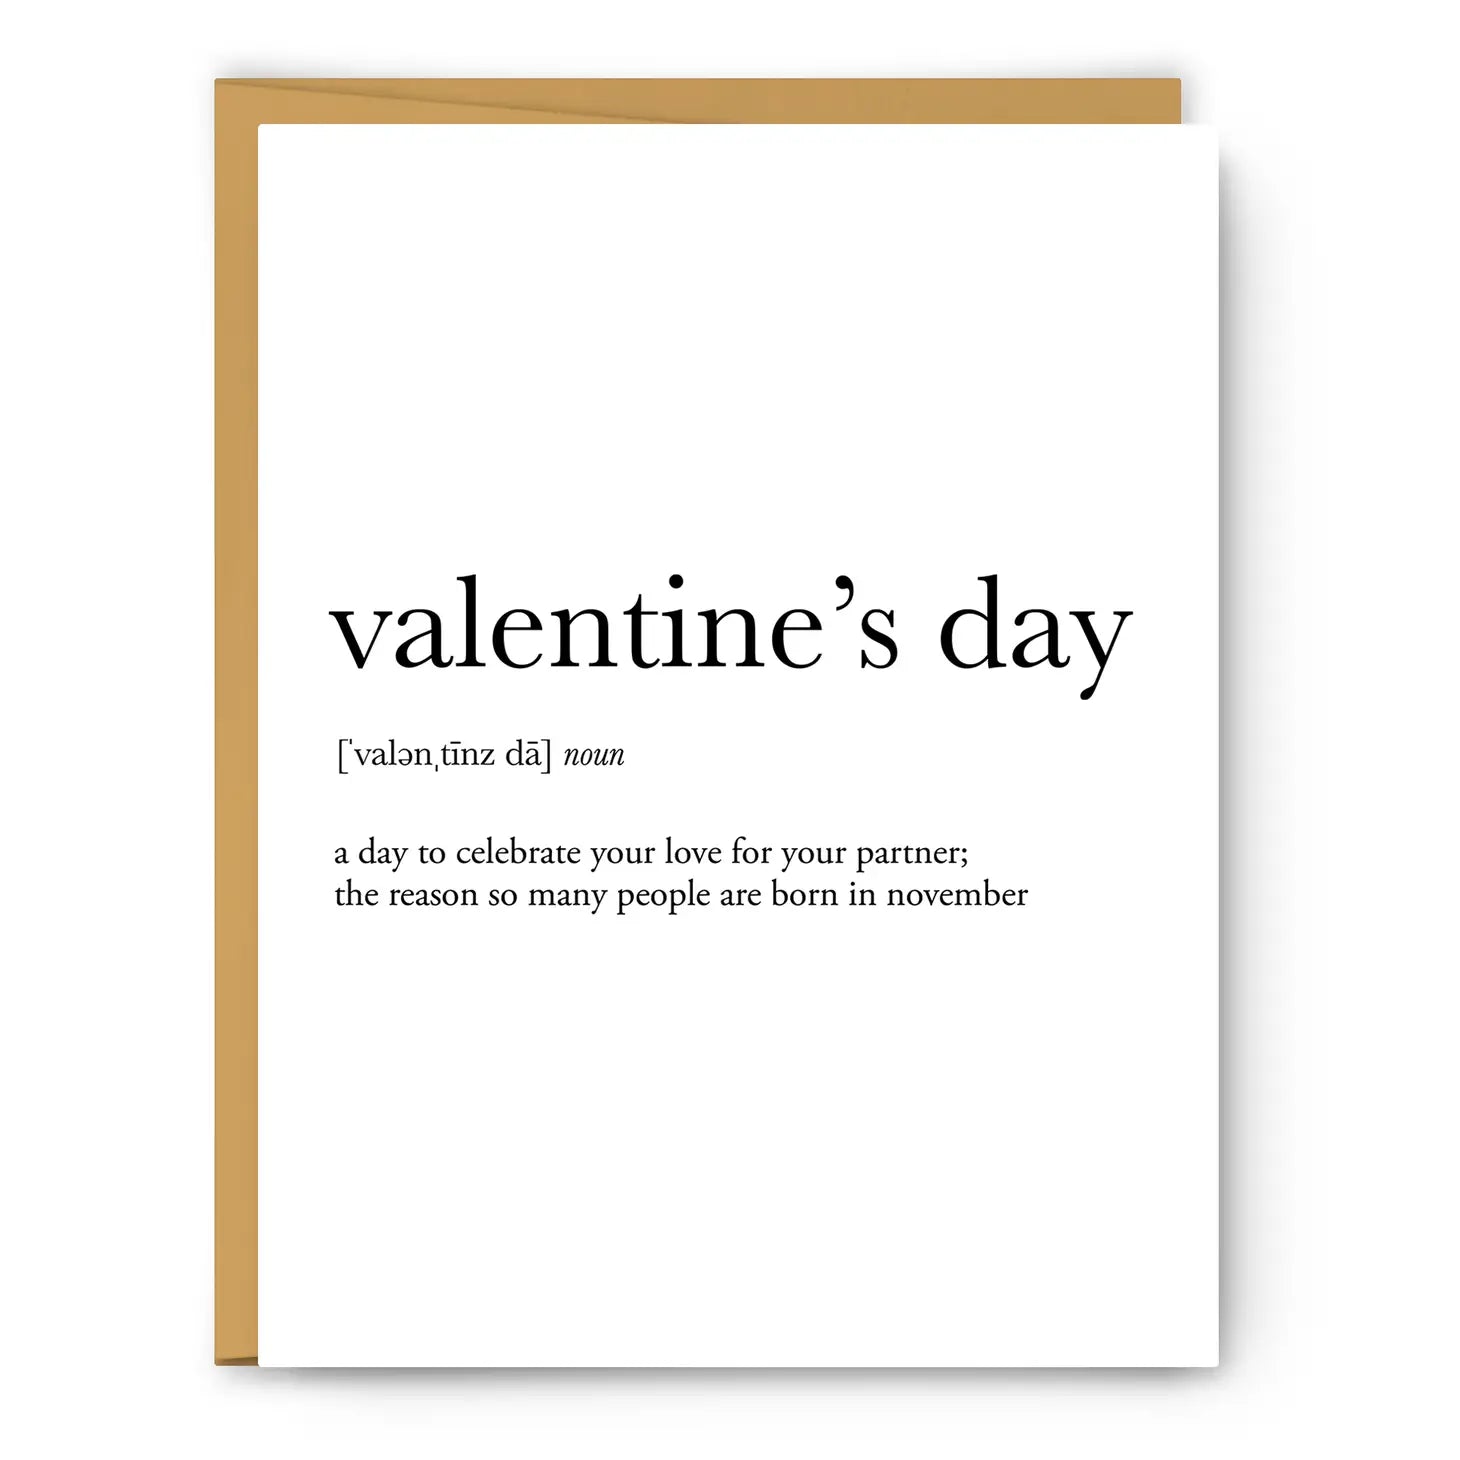 Definition Greeting Card: Valentine's Day